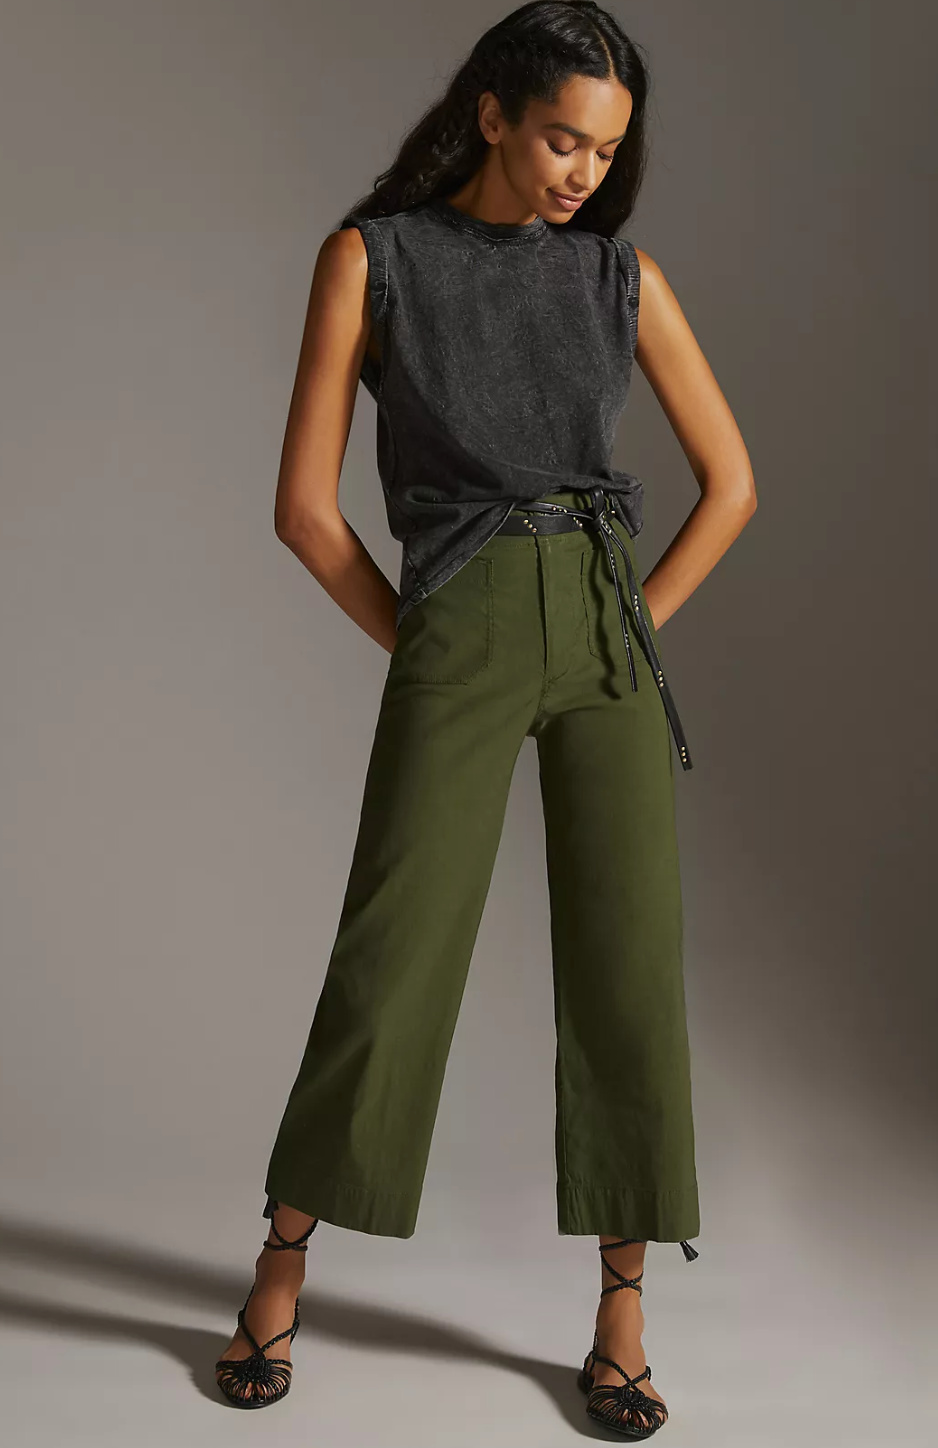 Six Wide Leg Cropped Pants Outfits  By Lauren M